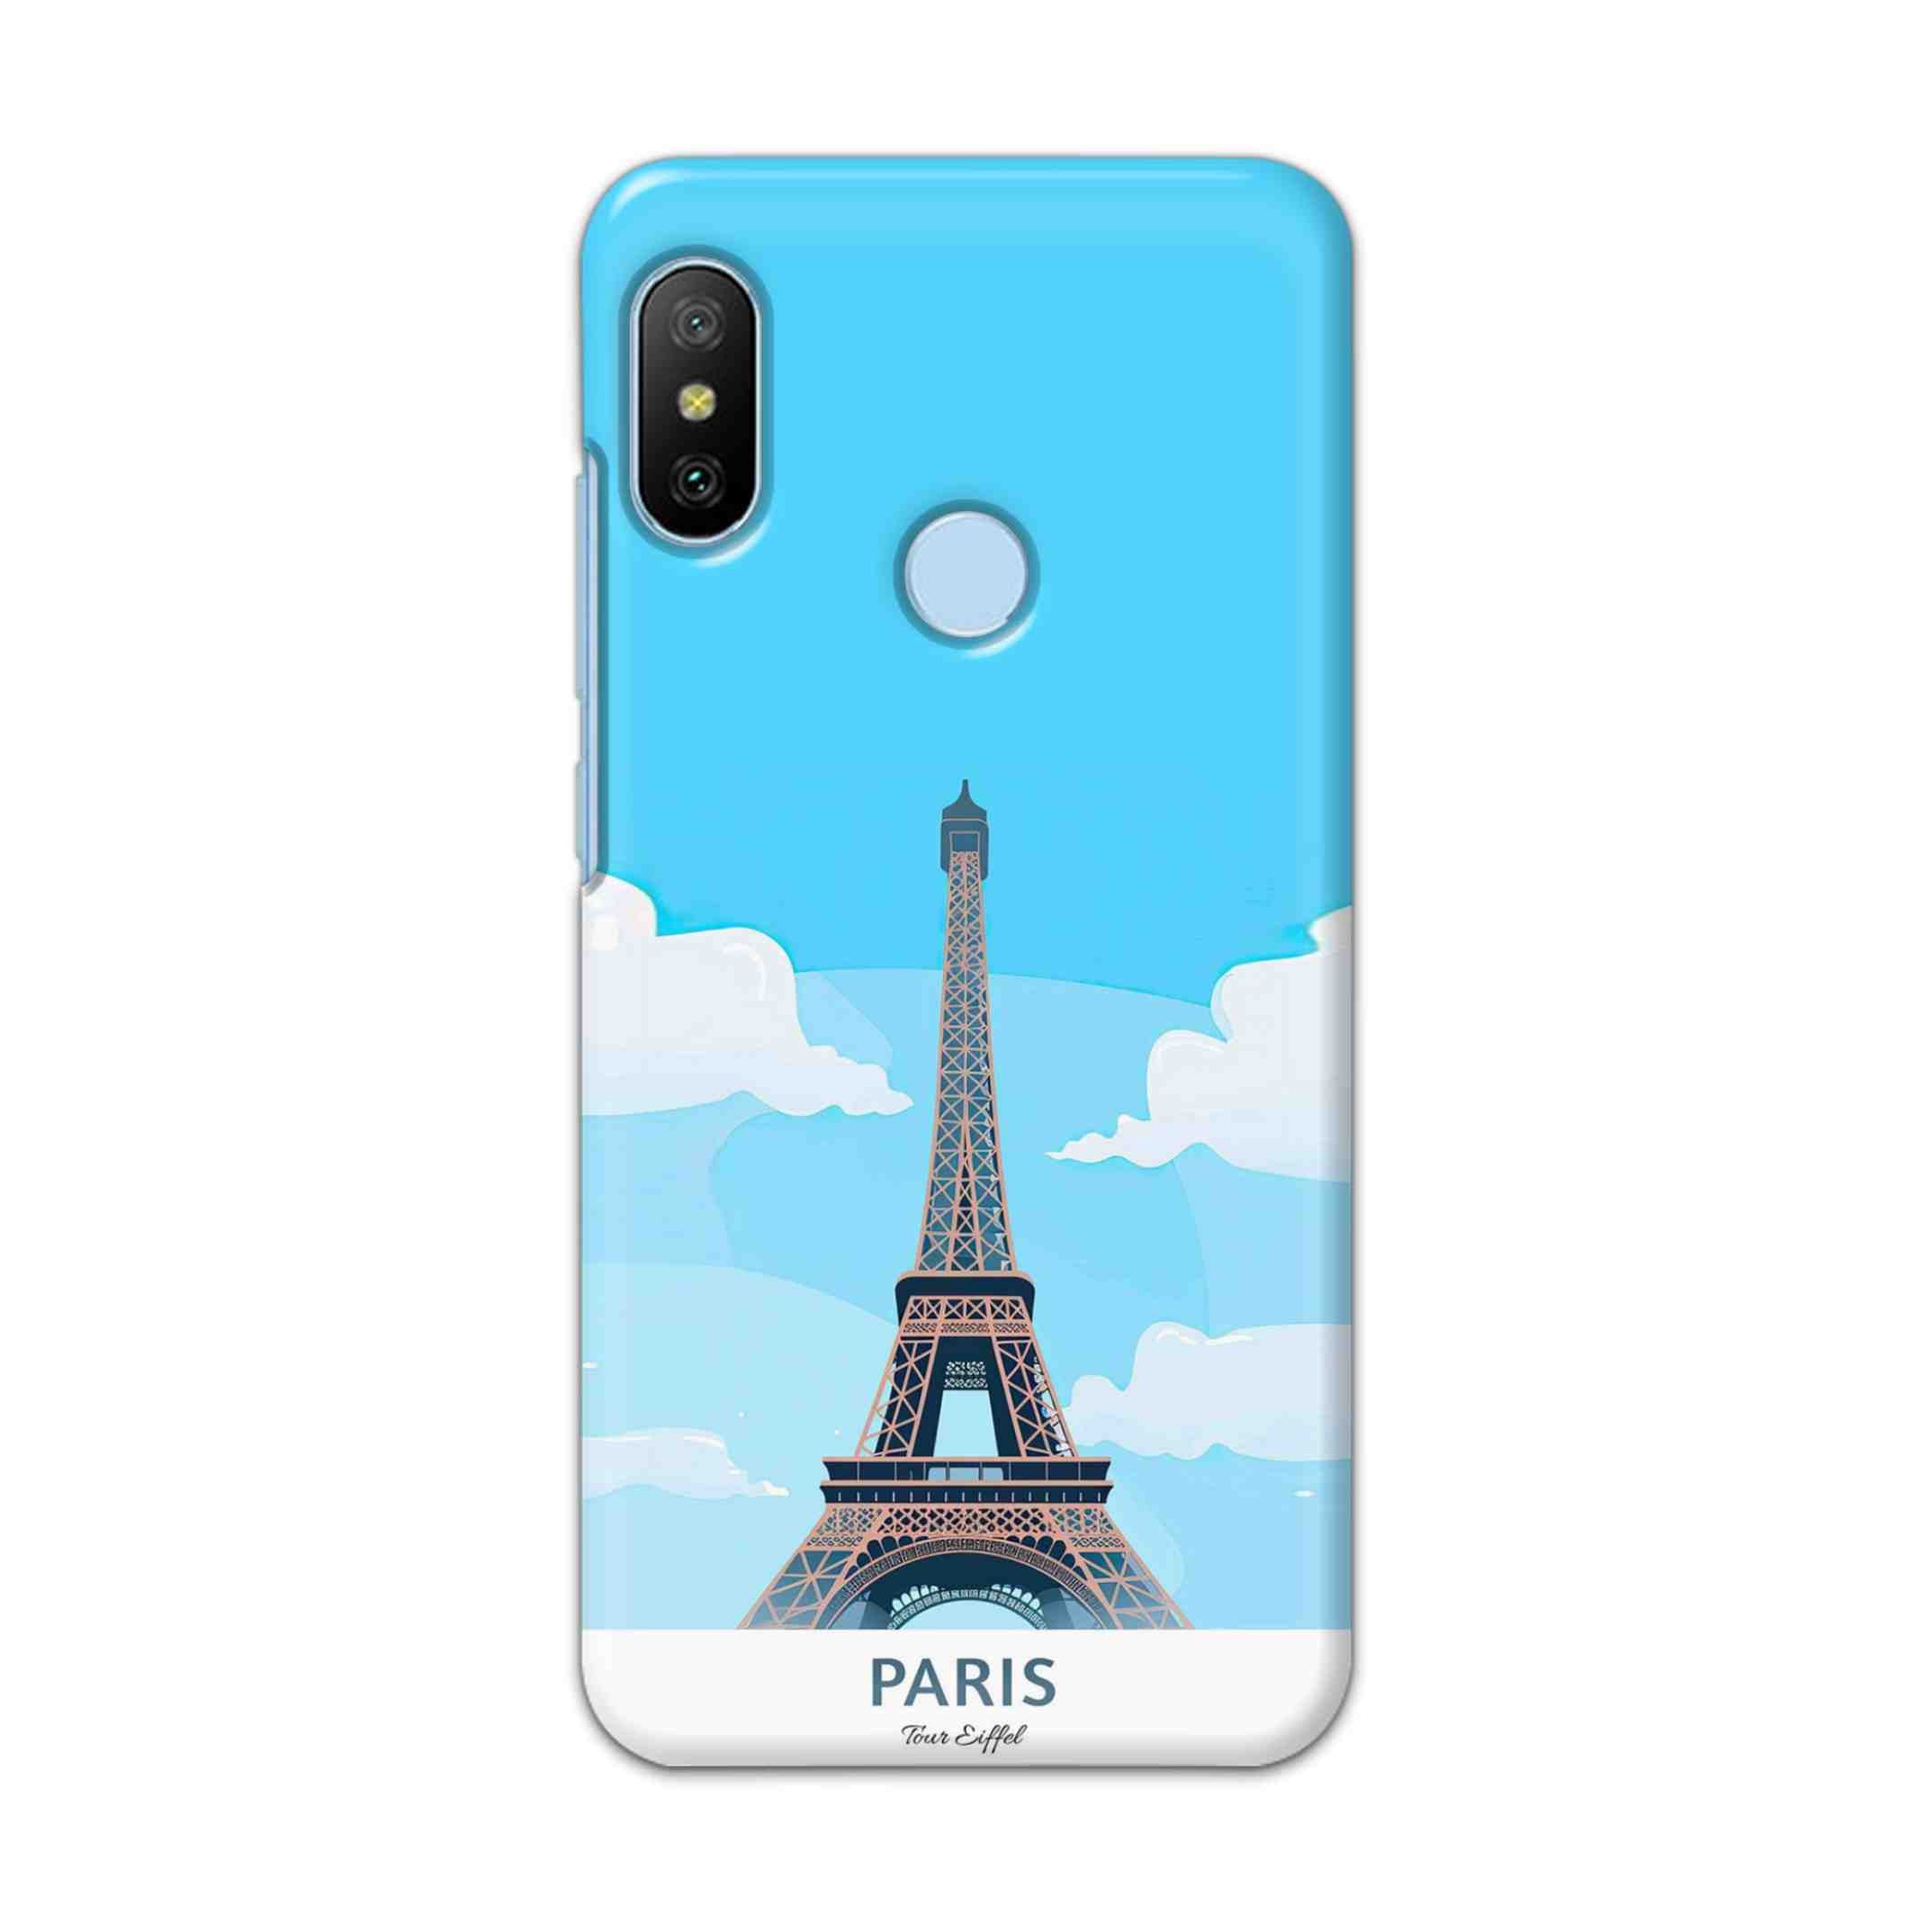 Buy Paris Hard Back Mobile Phone Case/Cover For Xiaomi A2 / 6X Online